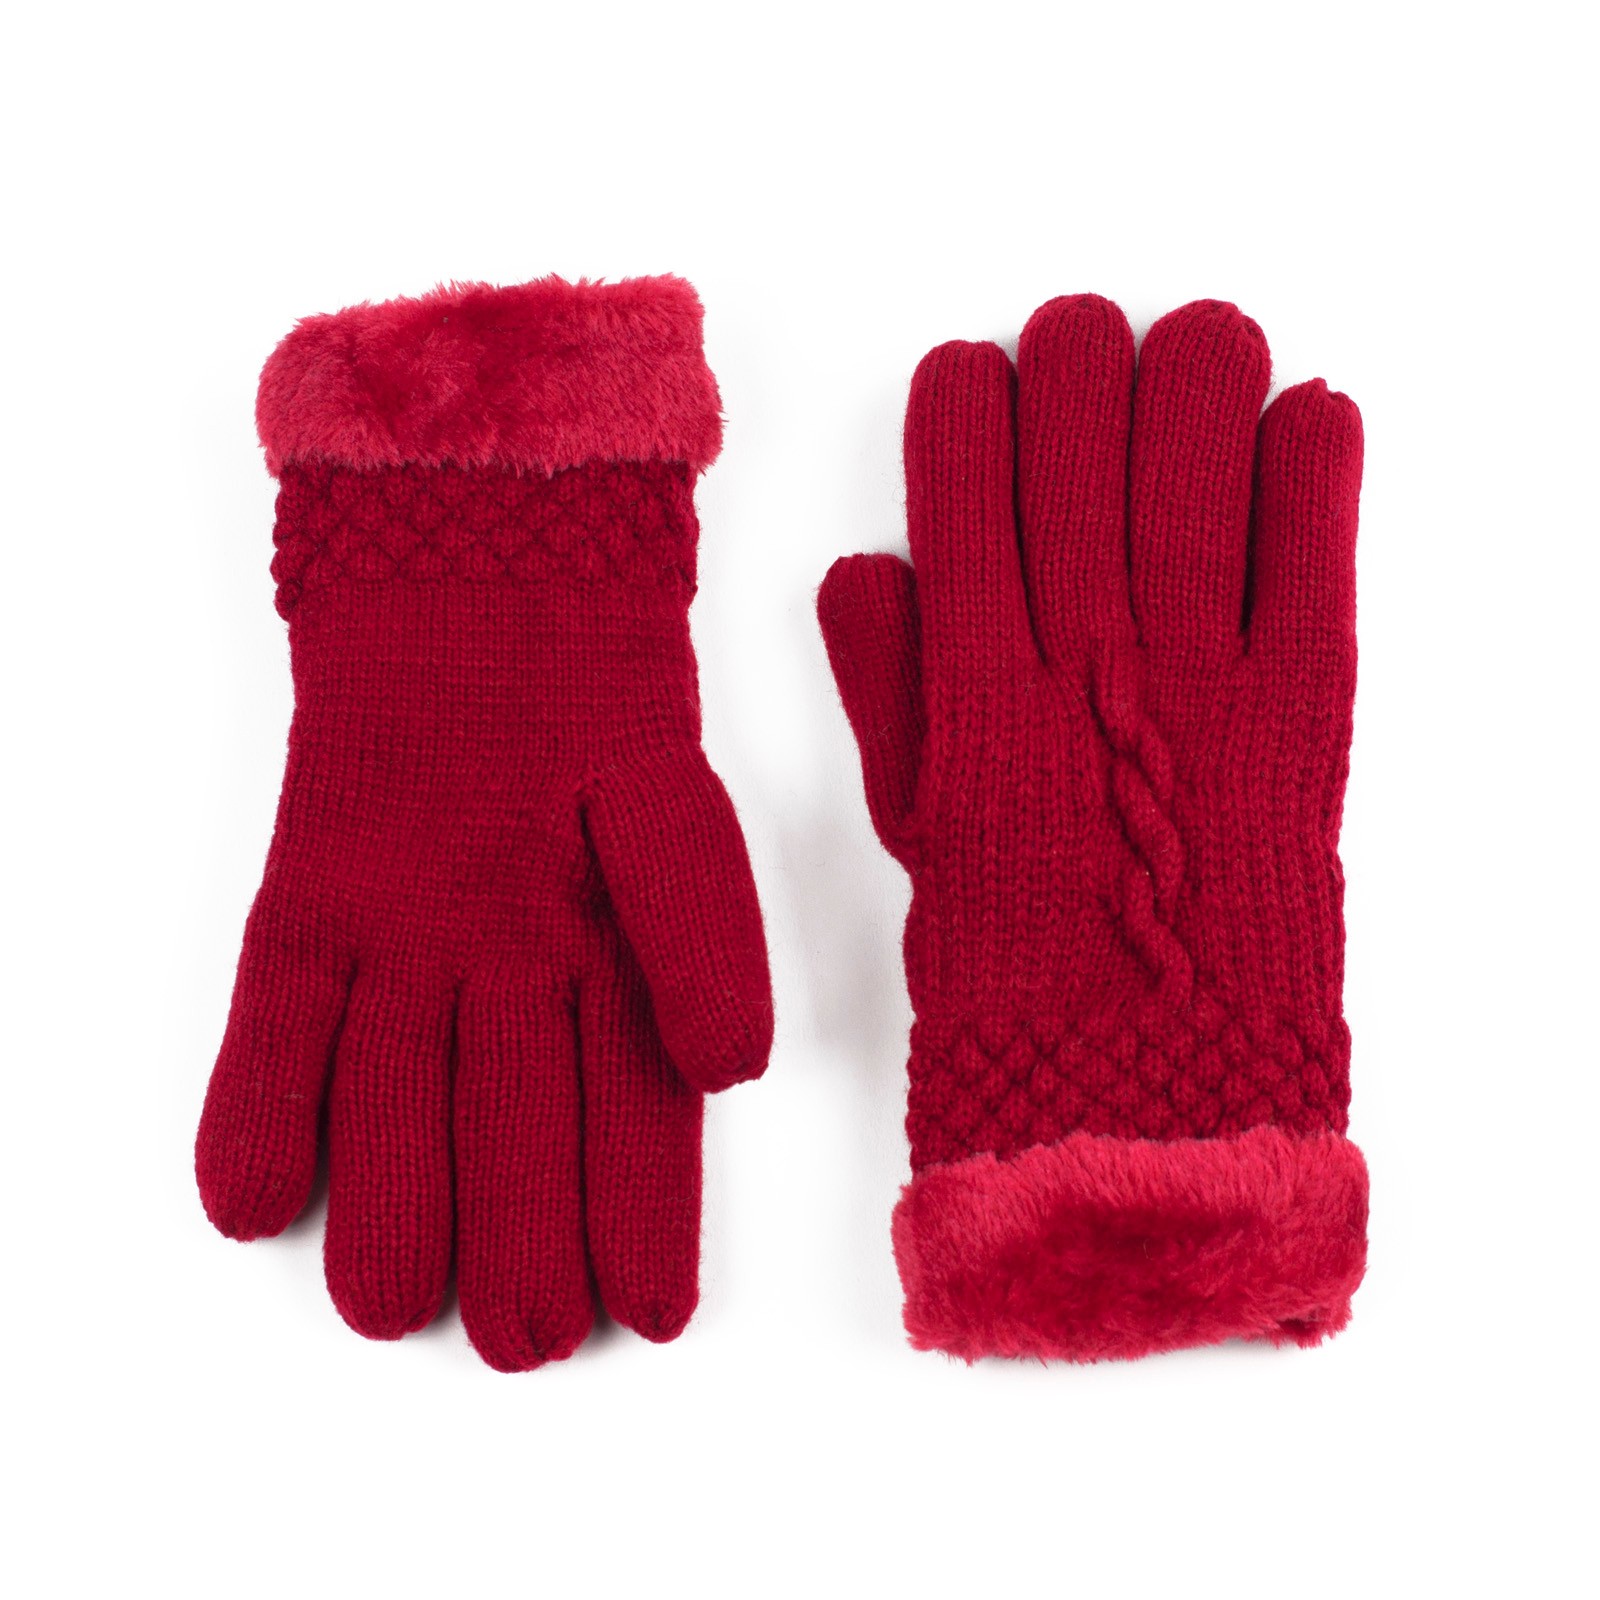 Art Of Polo Woman's Gloves Rk13408-4